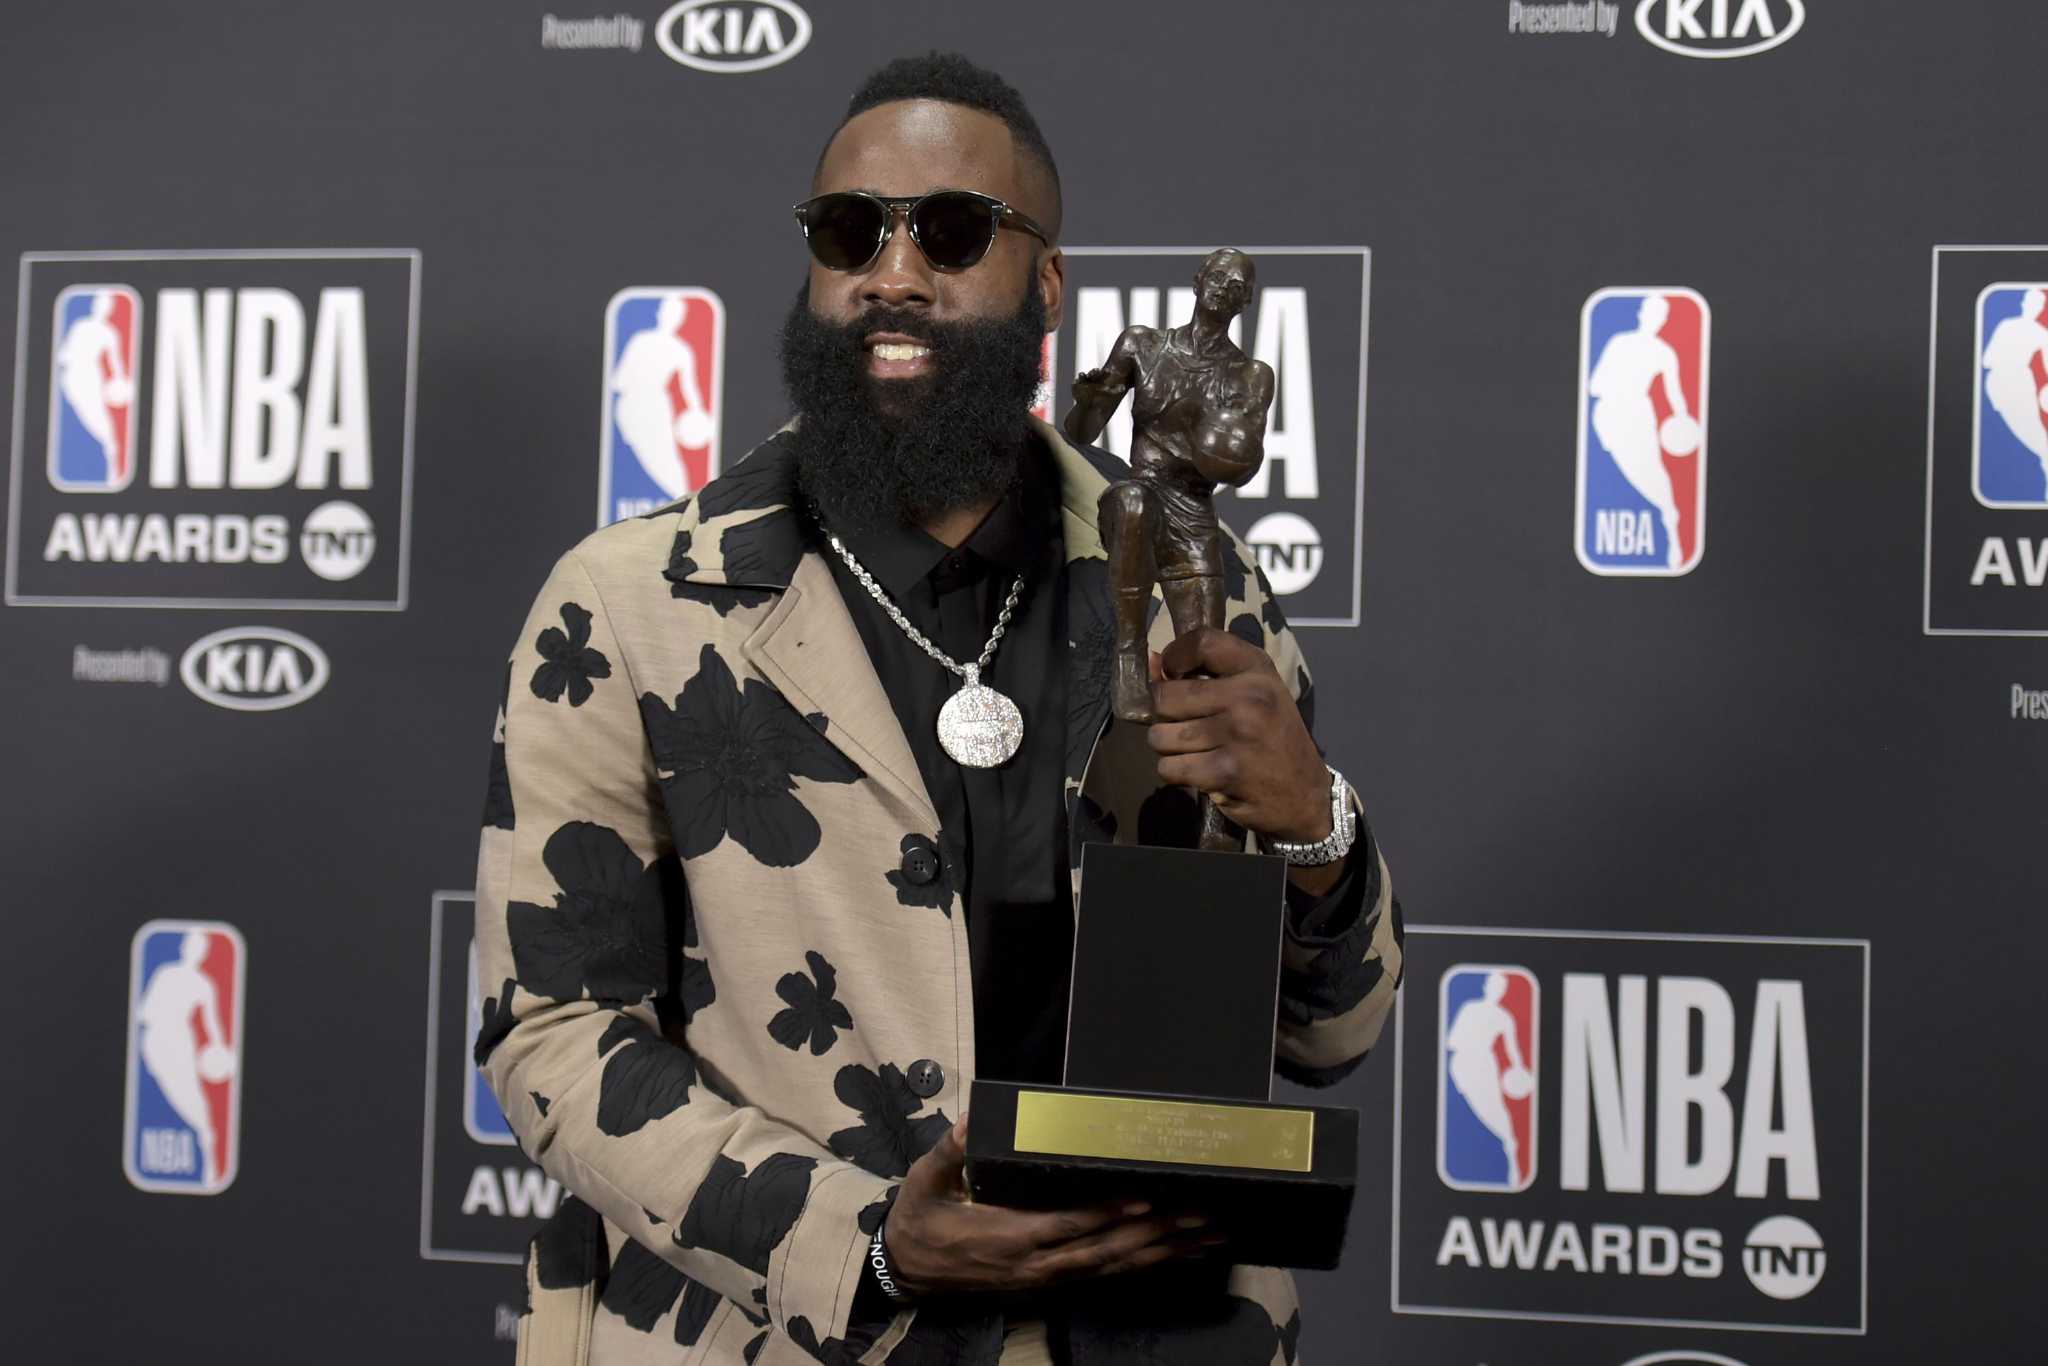 James Harden and P.J. Tucker: Name a More Iconic Fashion Playoff